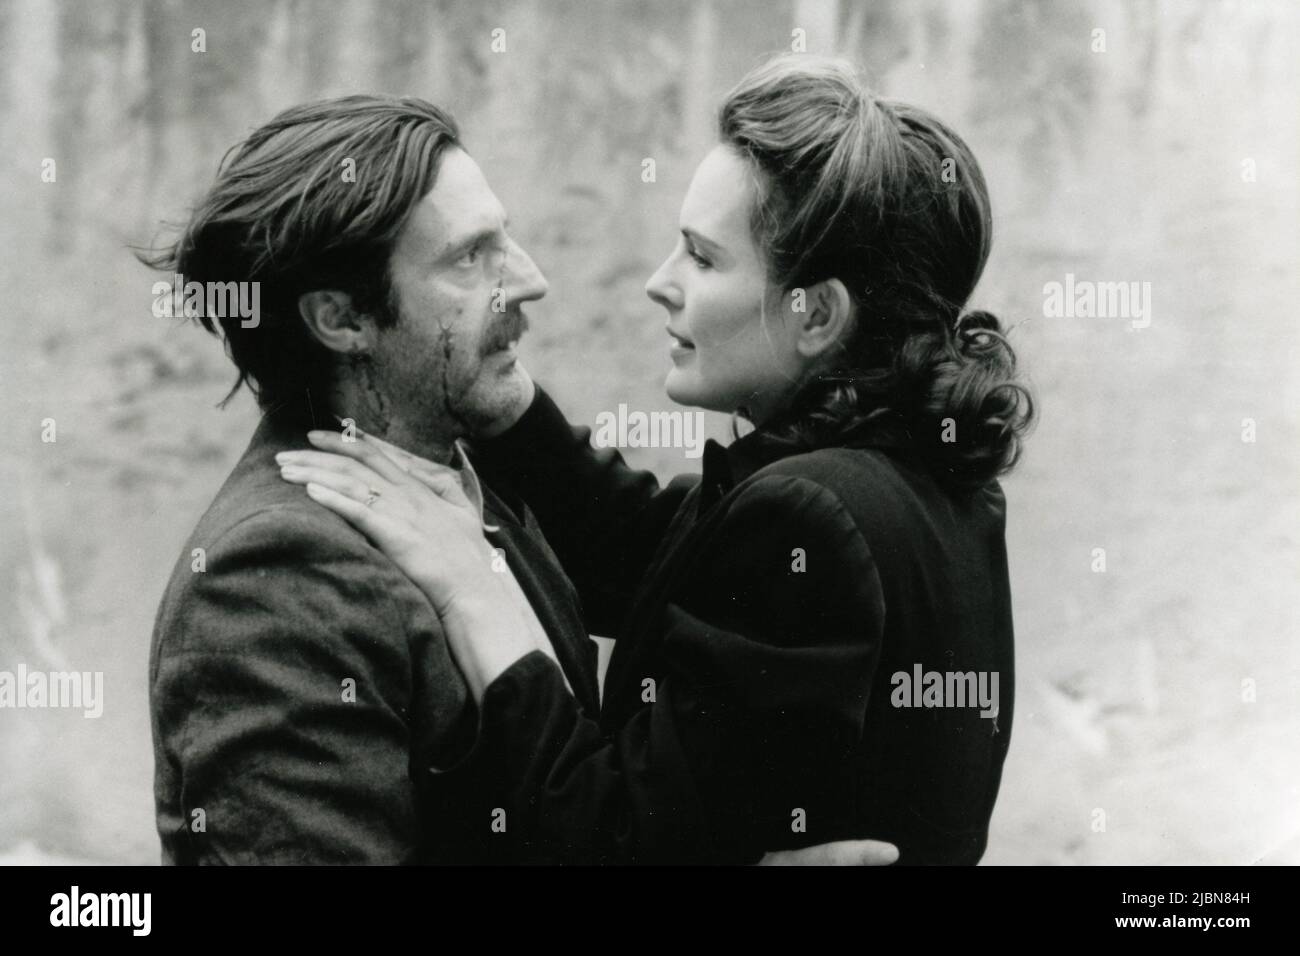 French actor Daniel Auteuil and actress Carole Bouquet in the movie Lucie Aubrac, France 1997 Stock Photo